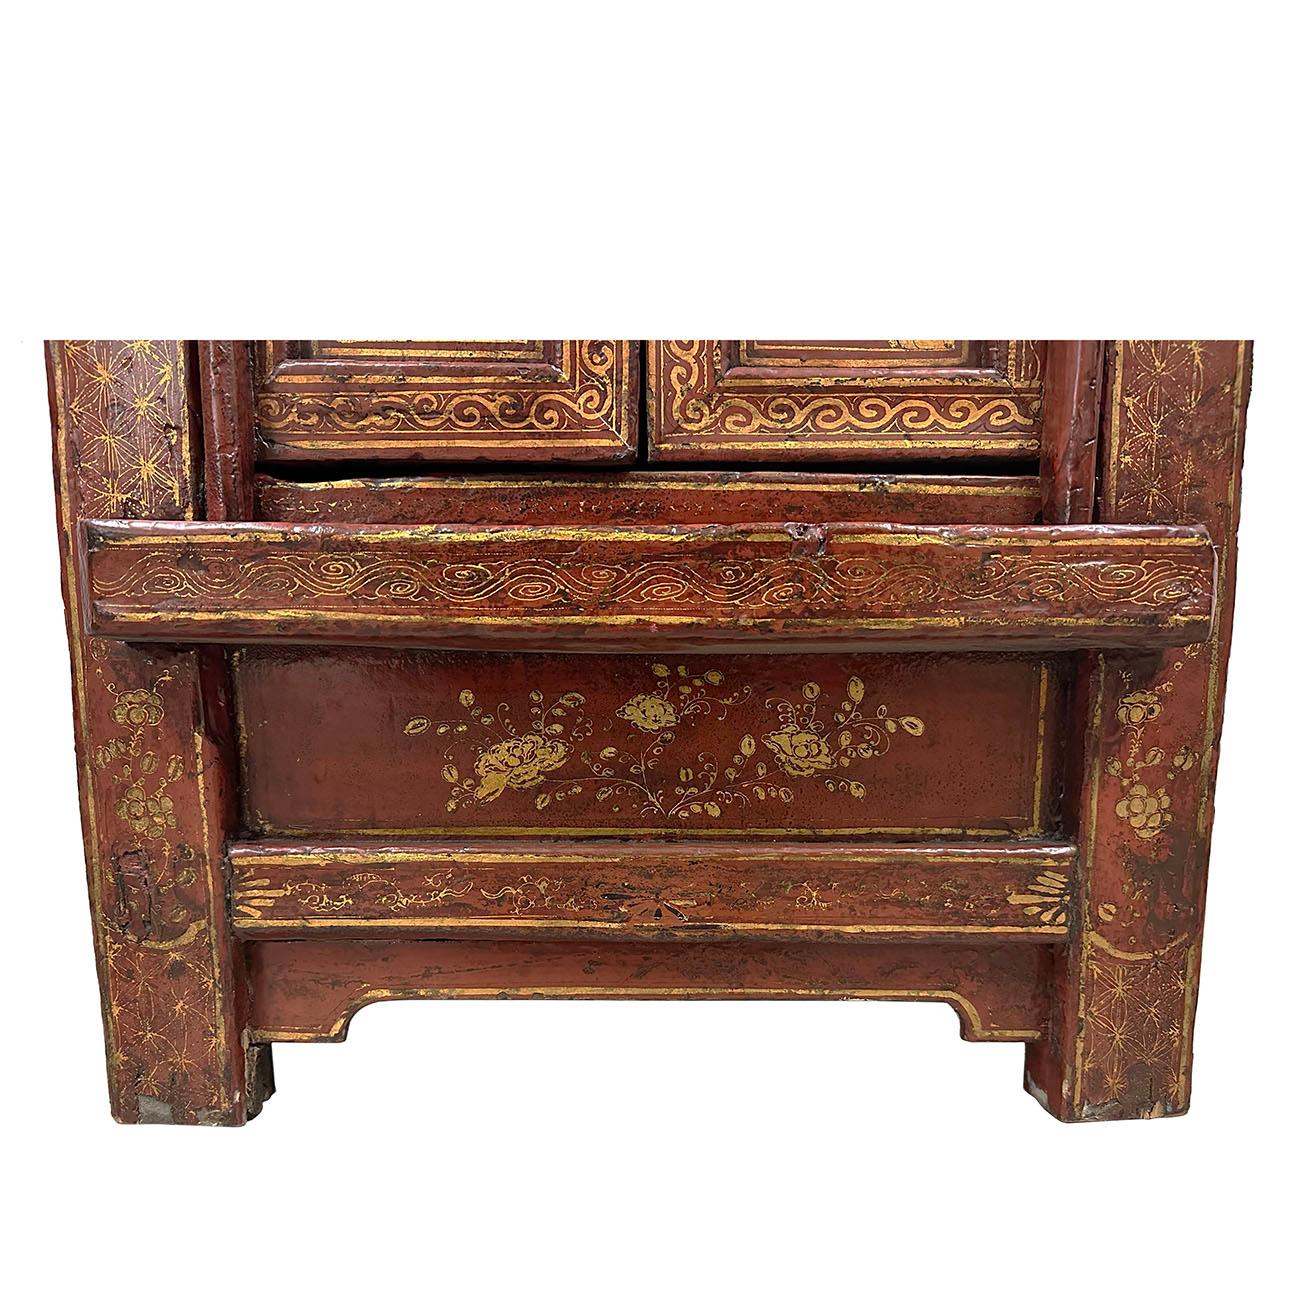 Chinese Late Qing Dynasty Bedside Wooden Cabinet with Period Painting Art Works In Good Condition For Sale In Pomona, CA